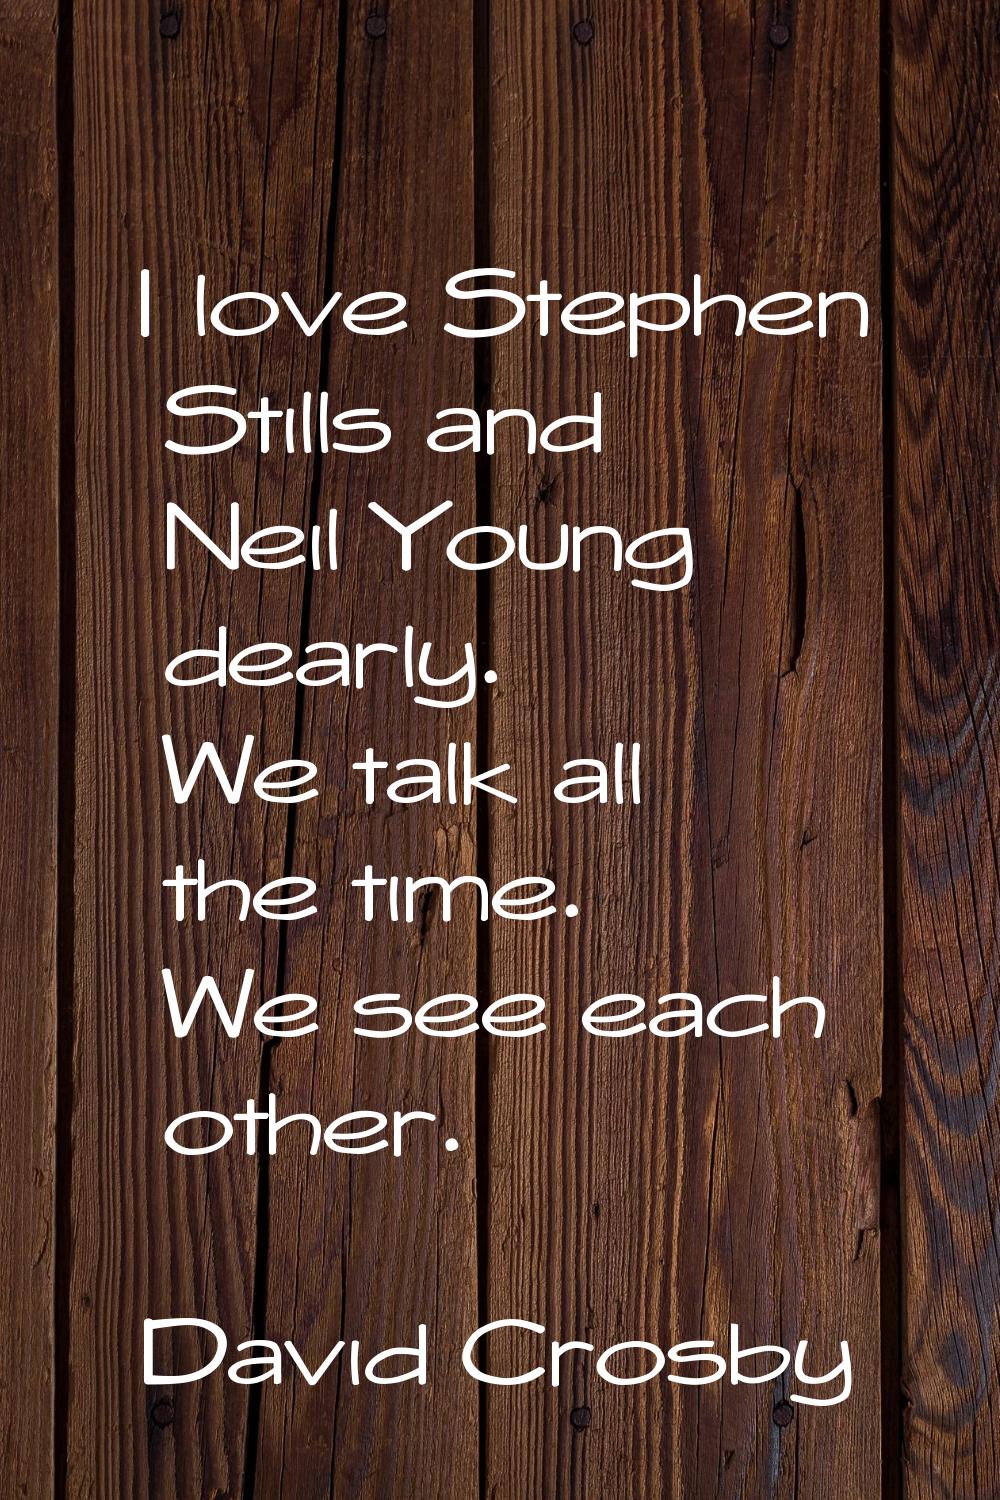 I love Stephen Stills and Neil Young dearly. We talk all the time. We see each other.